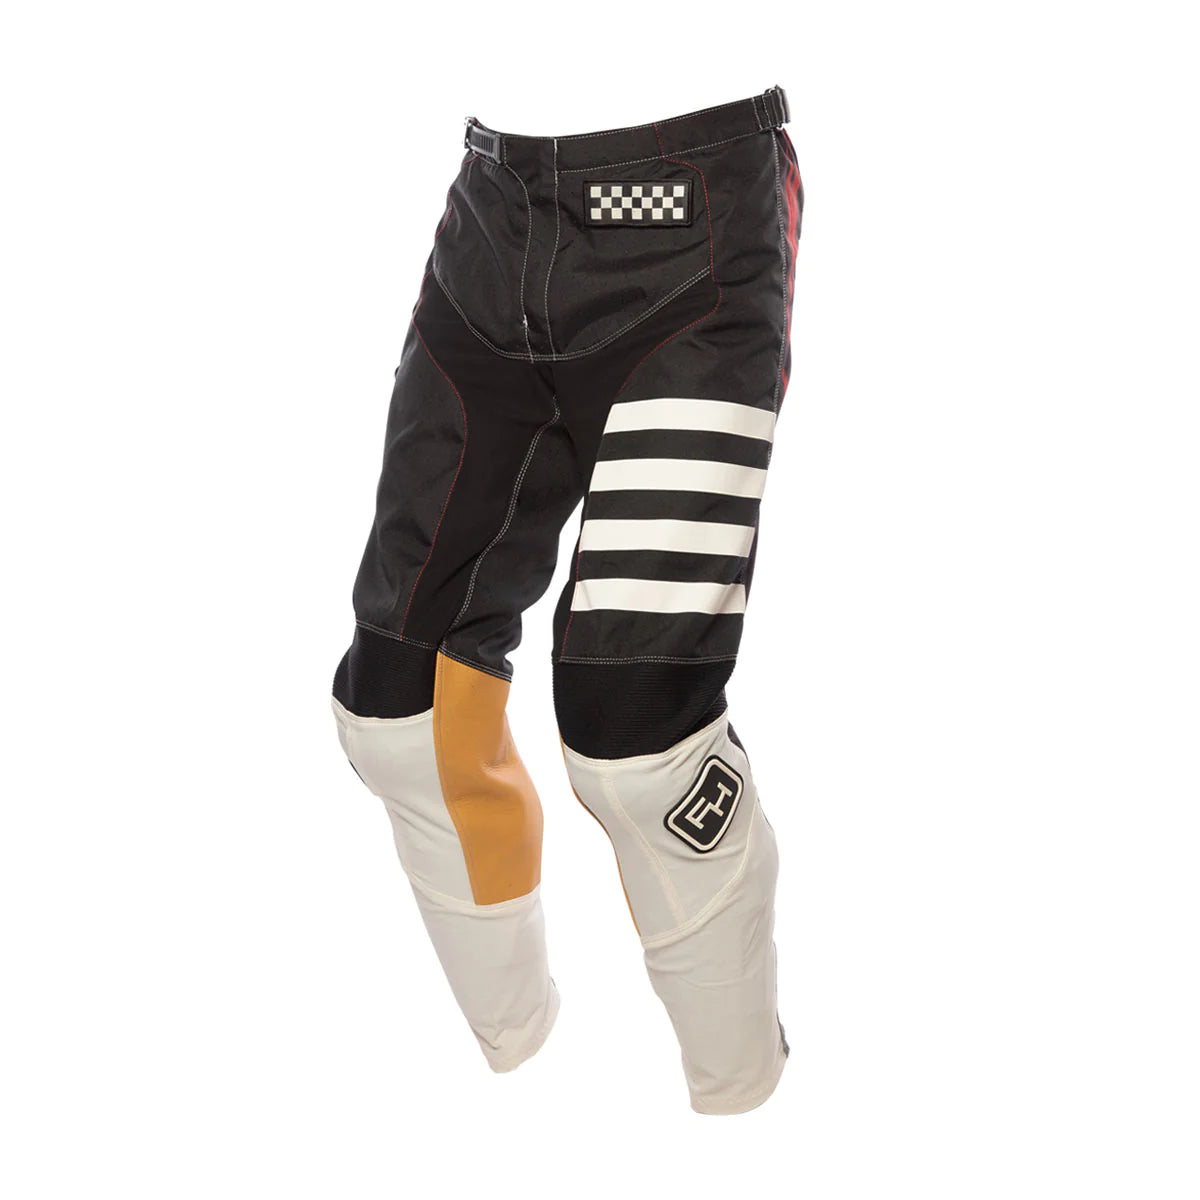 Fasthouse Youth Grindhouse Pants Black Cream Y24 Bike Pants